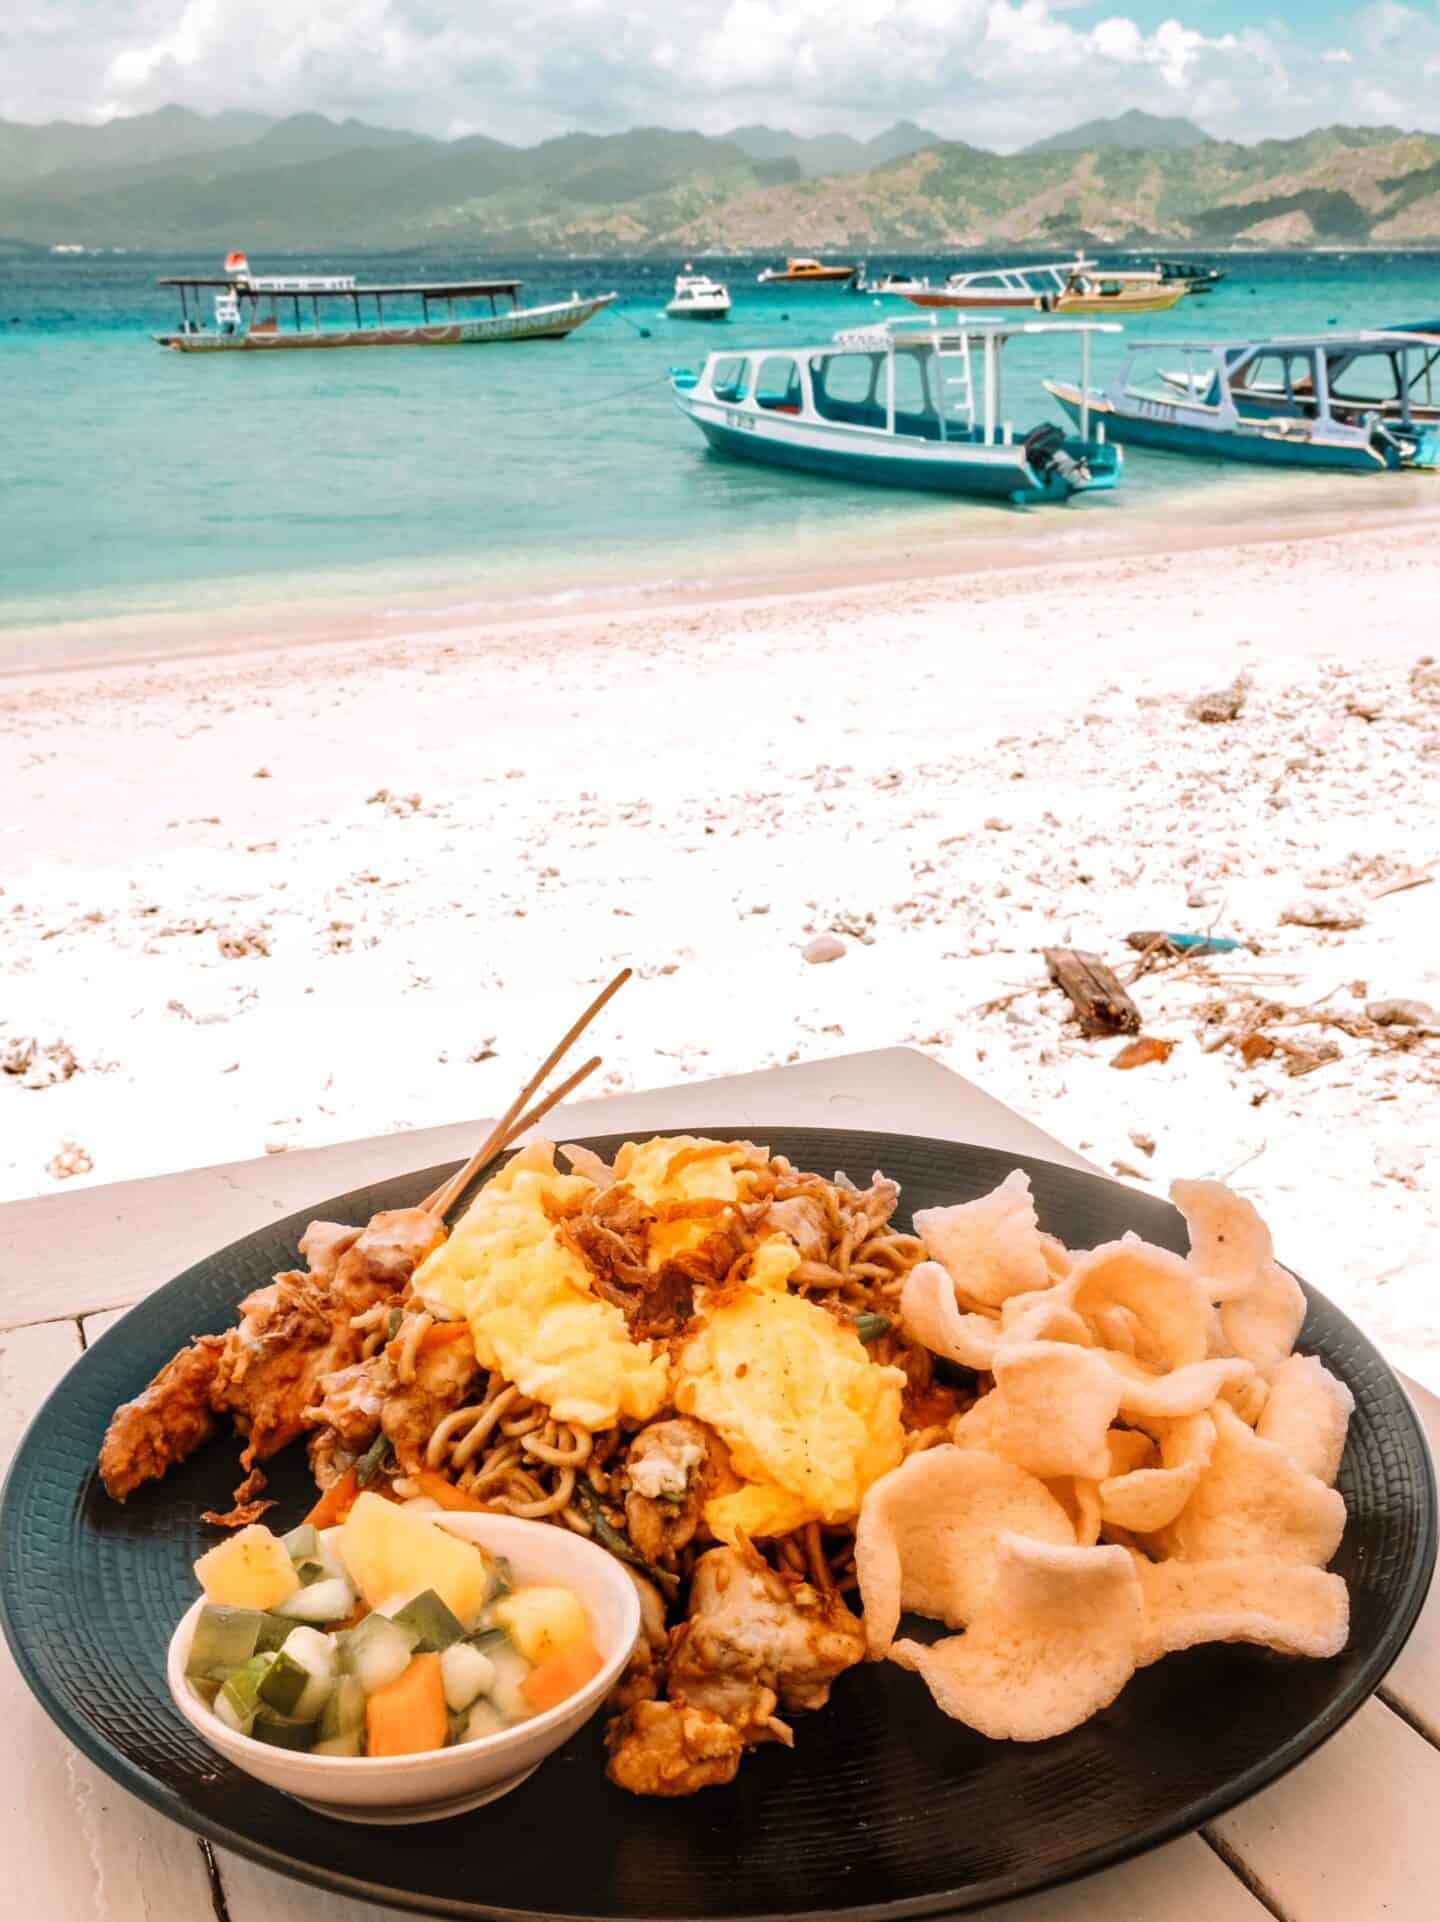 A piping-hot plate full of mie goreng from Scallywags Seafood Bar & Grill on Gili T with an ocean view